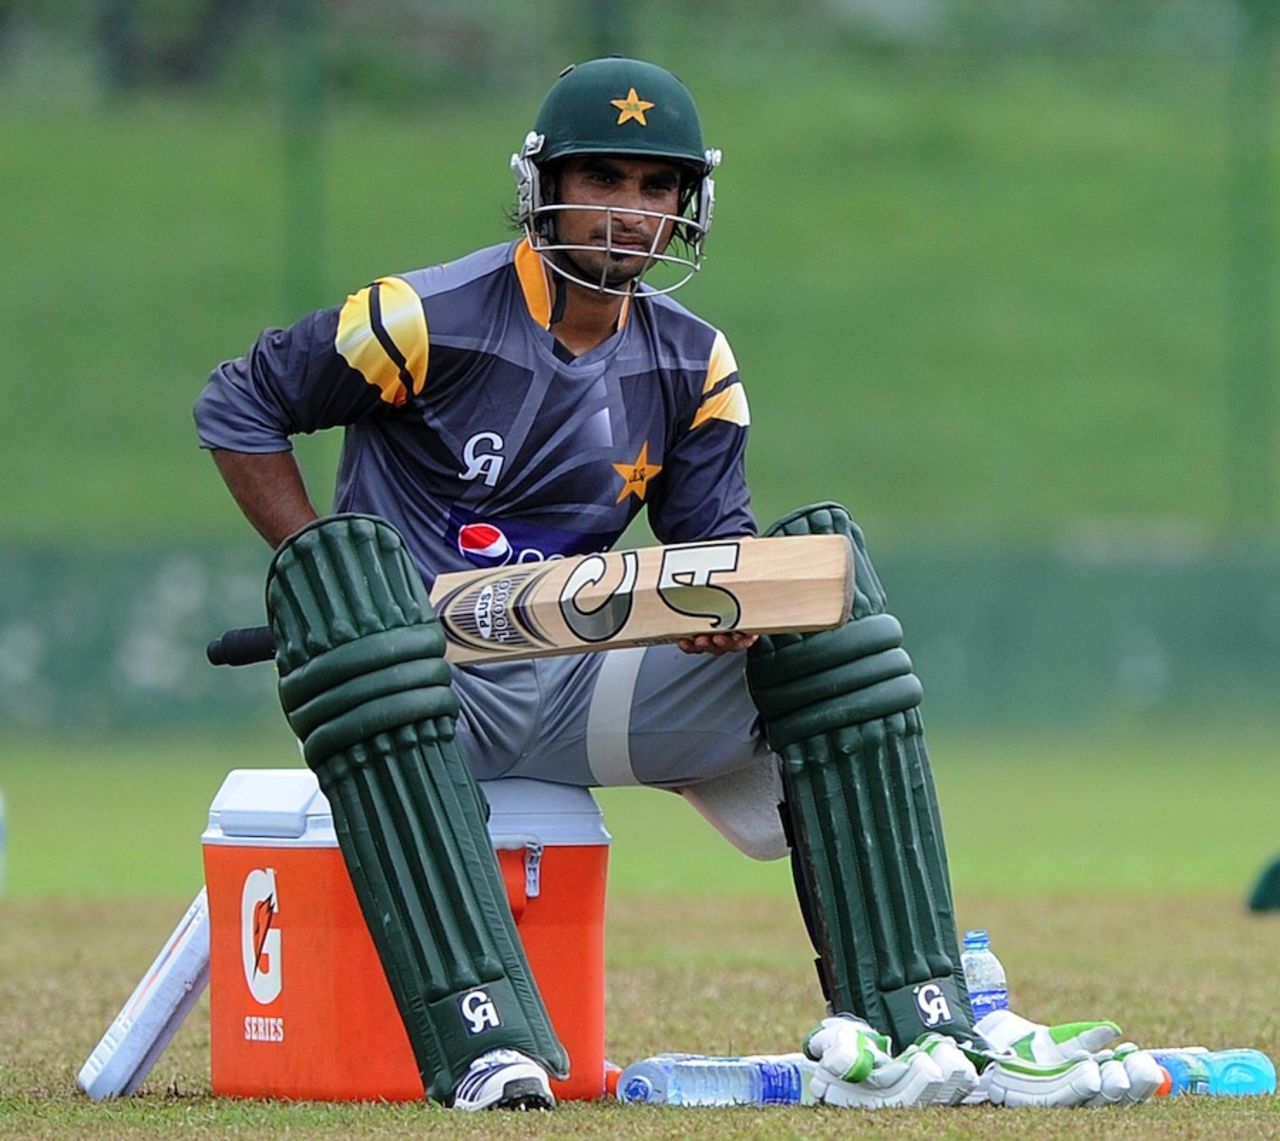 Imran Nazir takes a breather during practice, World T20 2012, Colombo, September 27, 2012